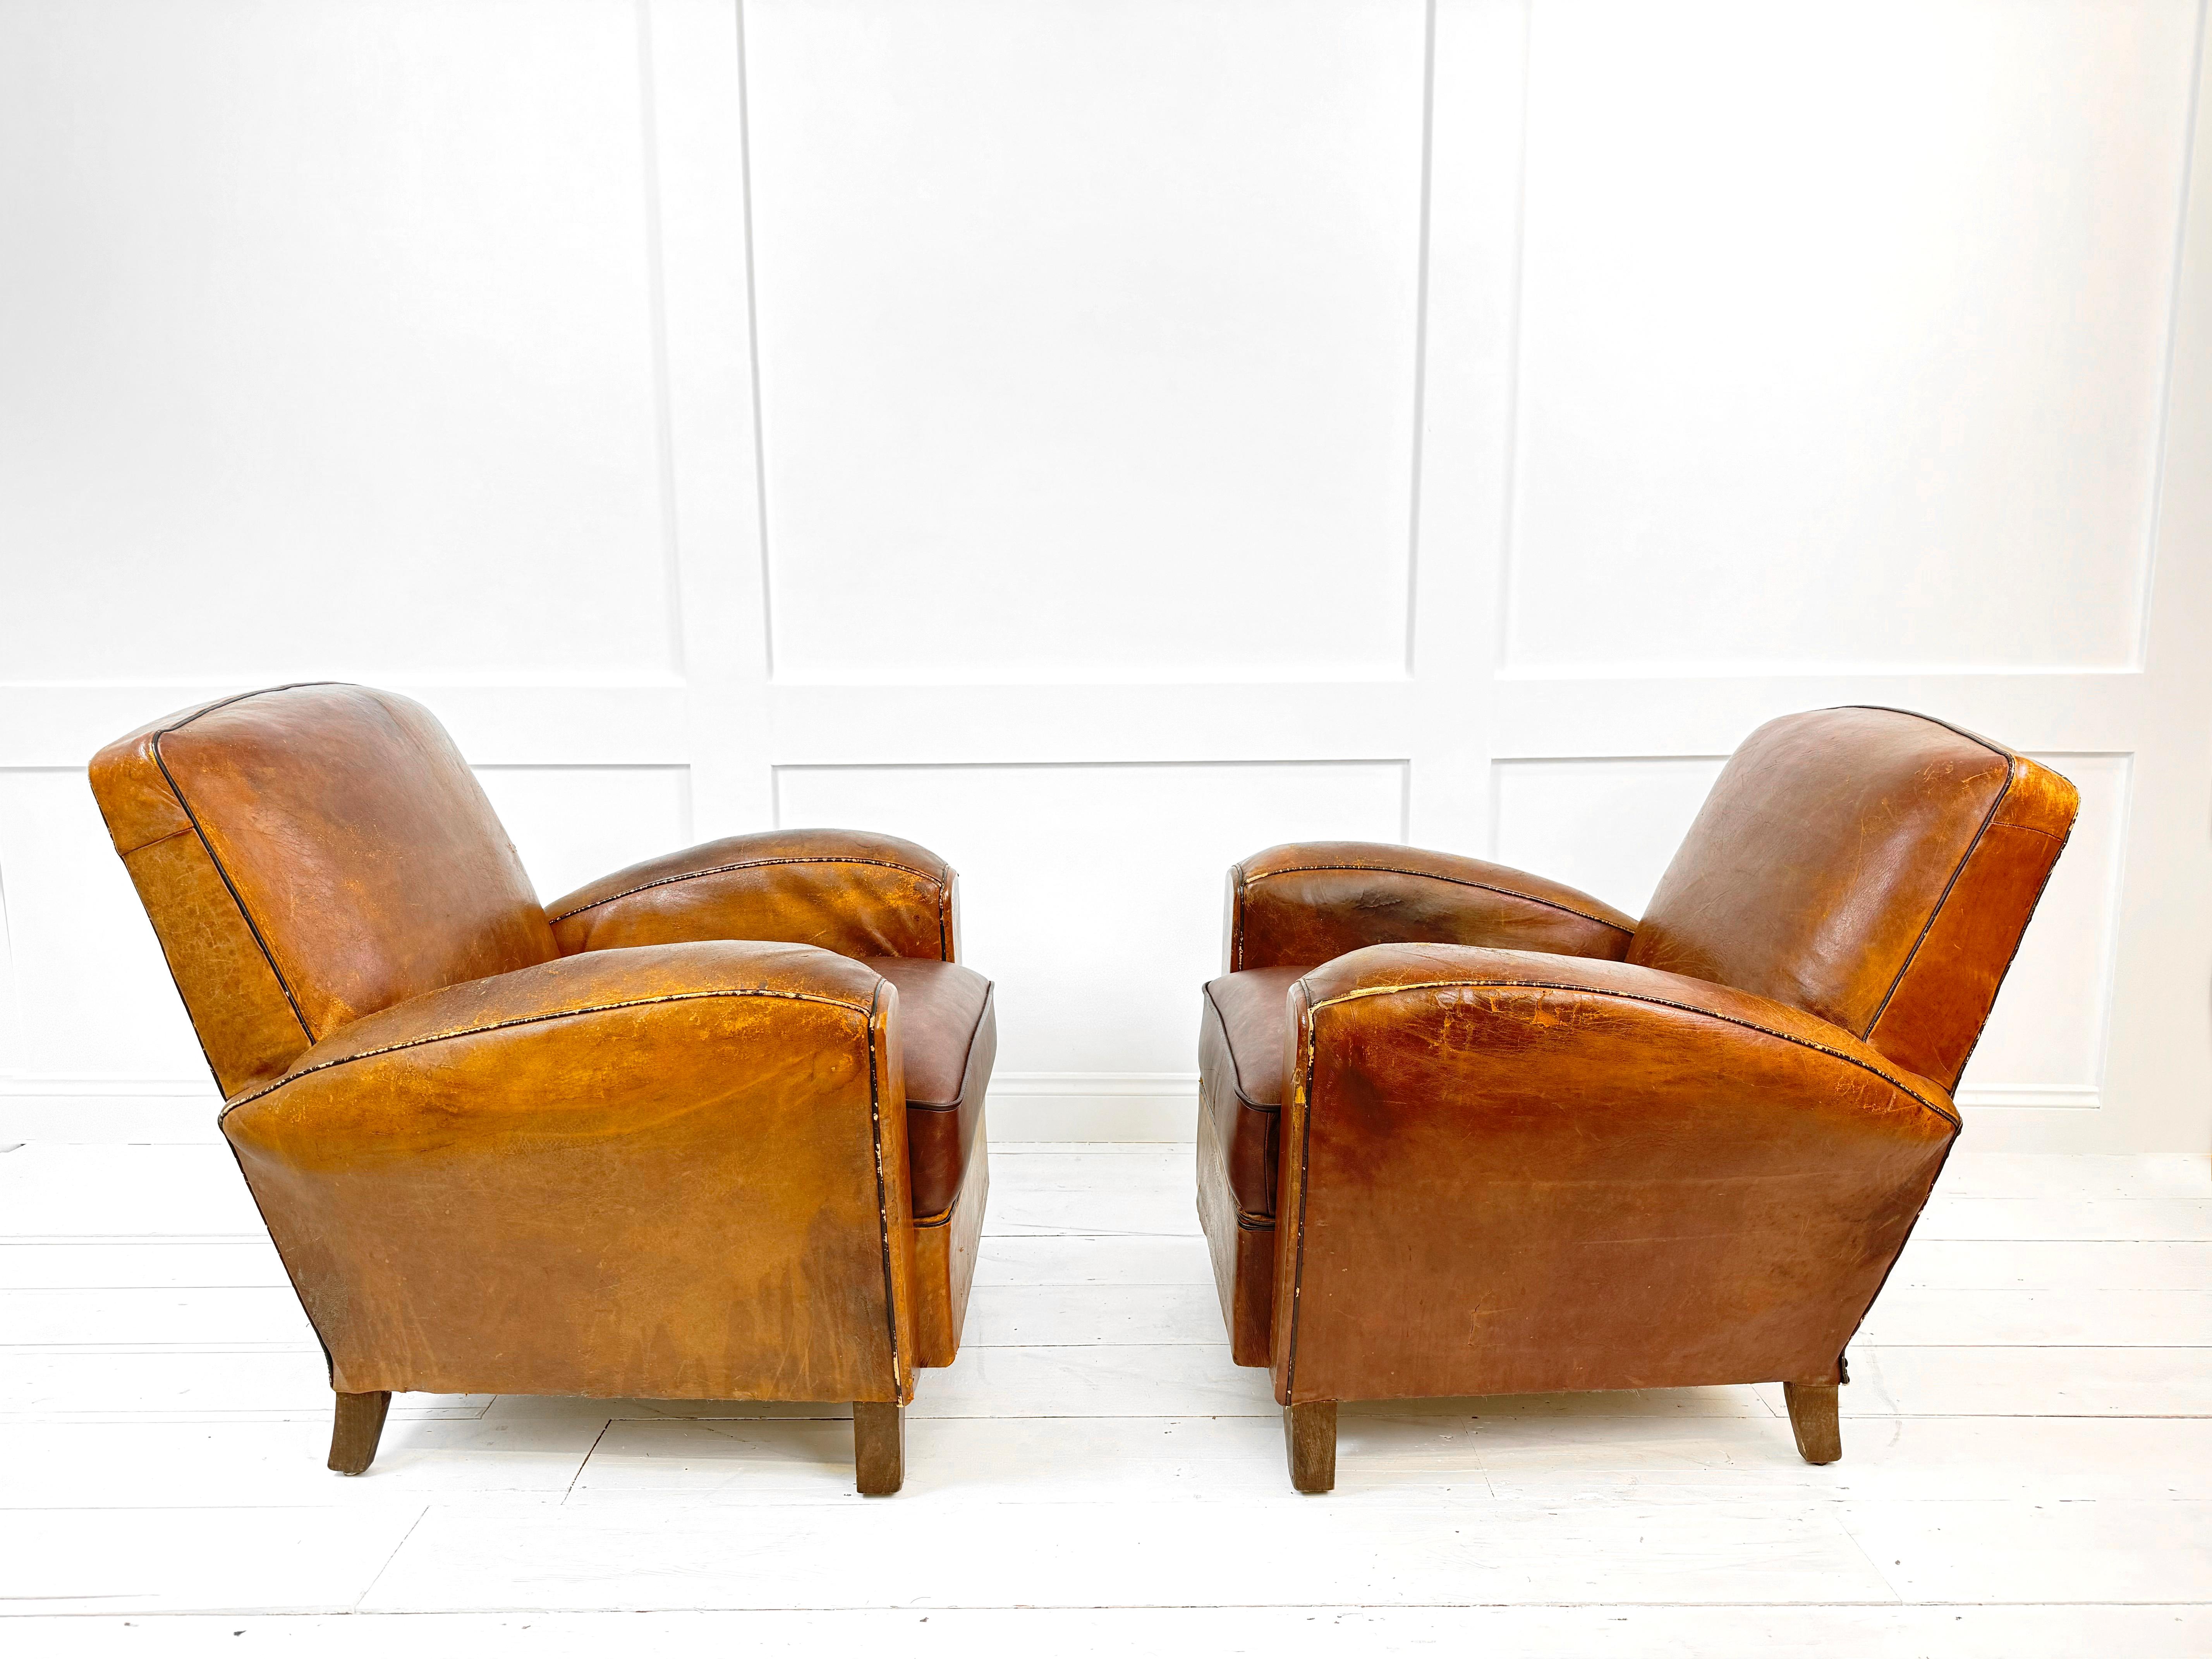 The quintessential of French Art Deco style - the Tan Leather Club Armchairs from the 1930's. This pair of exquisite armchairs exudes luxury and sophistication, showcasing the elegance of the era. Crafted from the finest tan leather and featuring